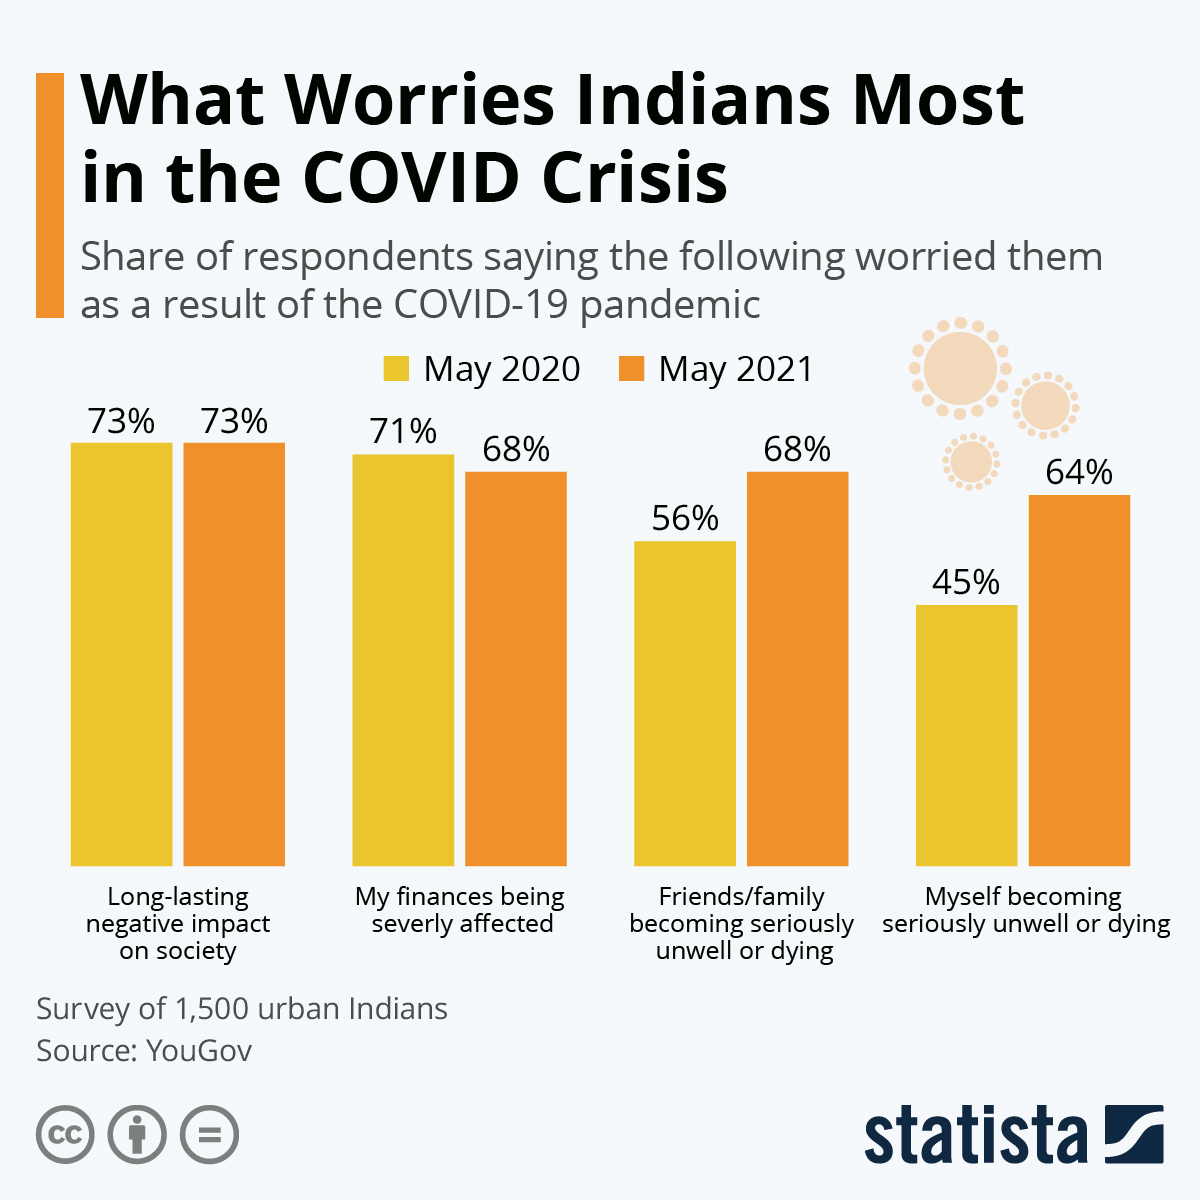 What Worries Indians Most in the COVID Crisis